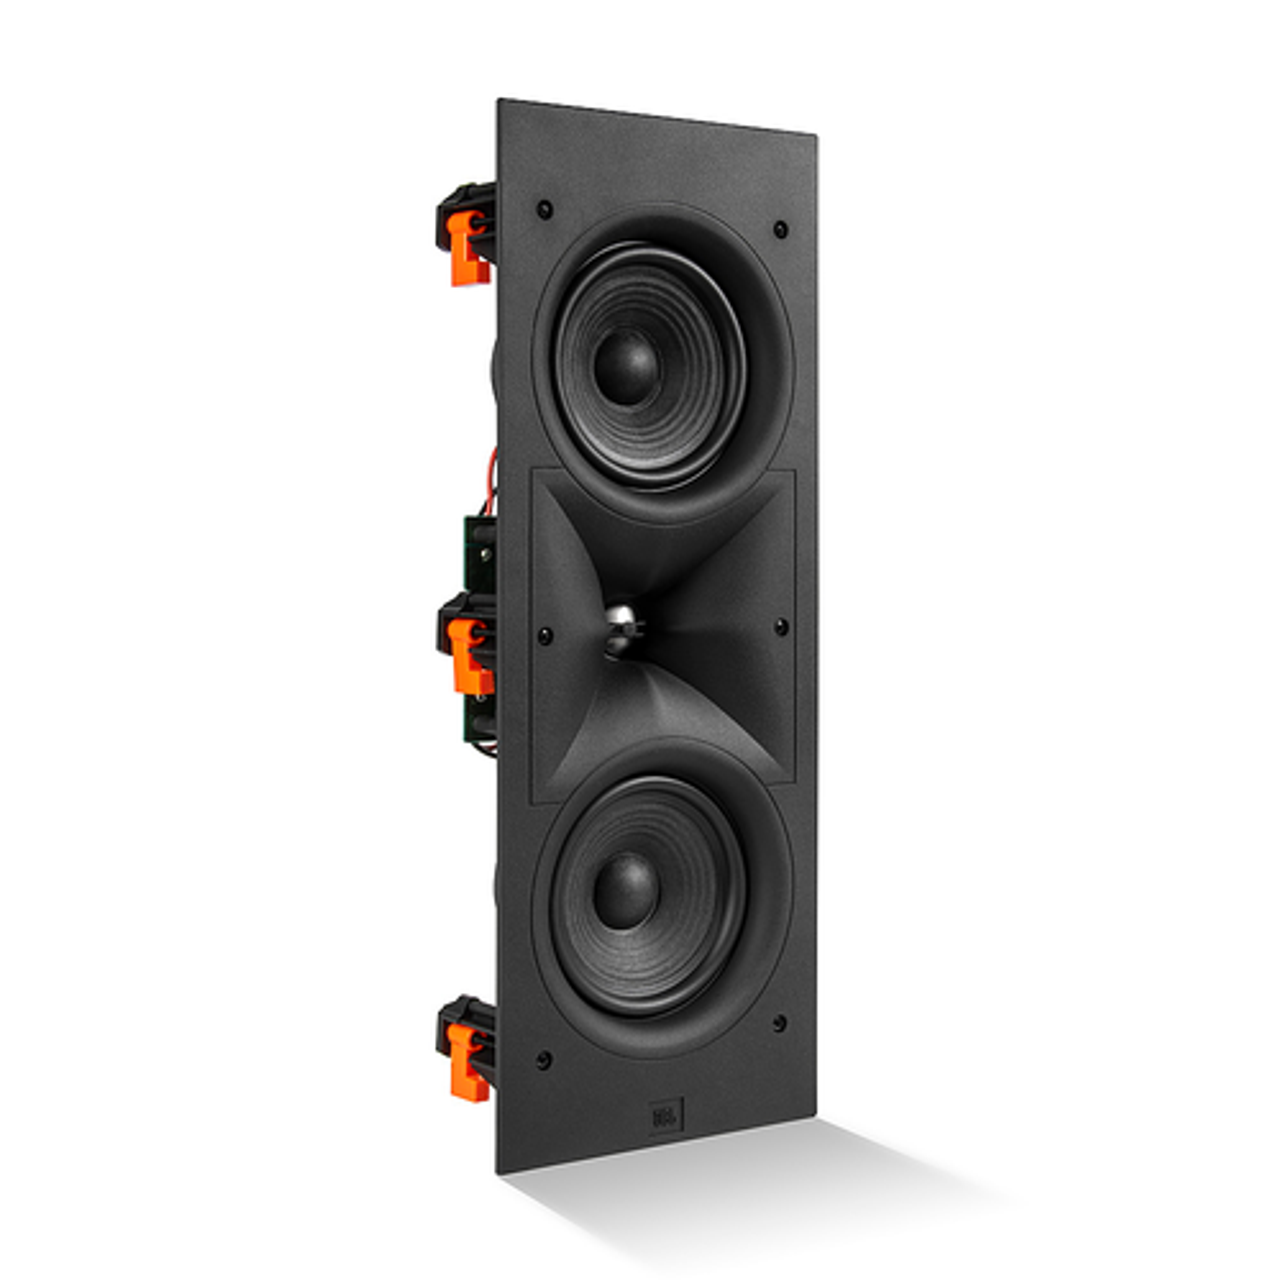 JBL - JBL250WL in-wall loudspeaker with 1" aluminum dome tweeter and dual 5.25" polycellulose cone woofers - Black